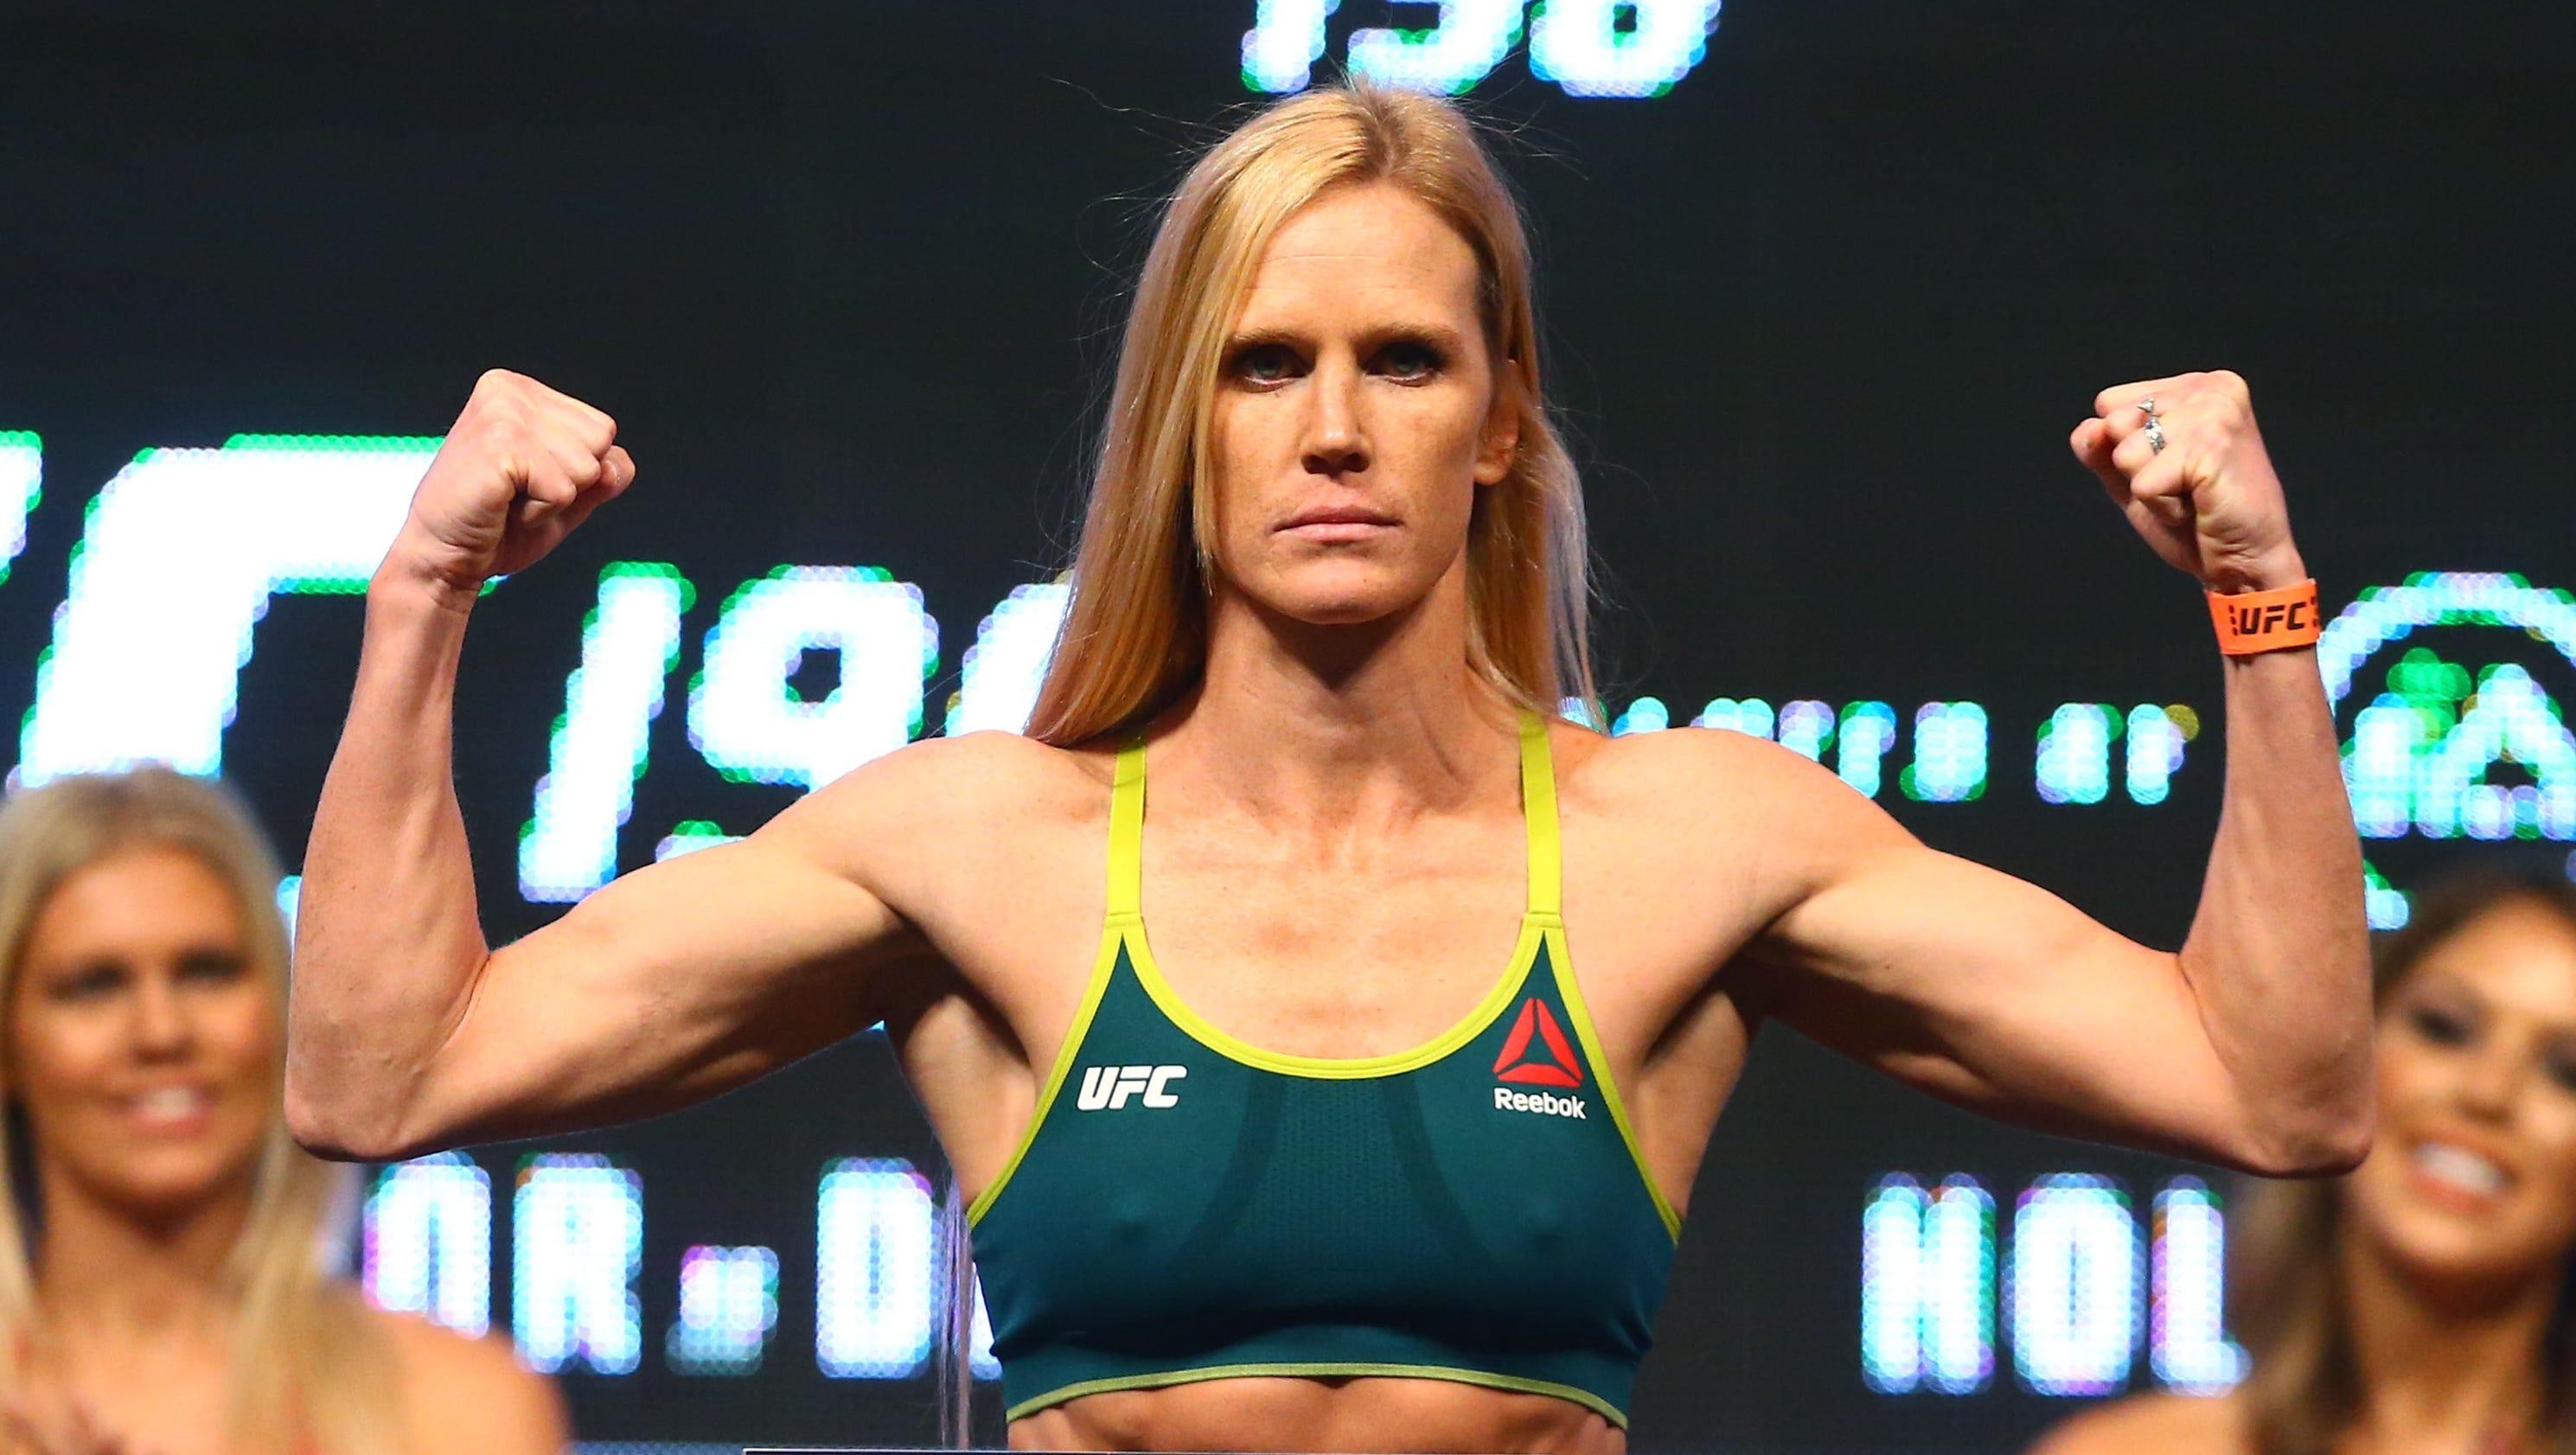 Holly Holm knows her reputation is at stake vs. Miesha Tate at UFC 196